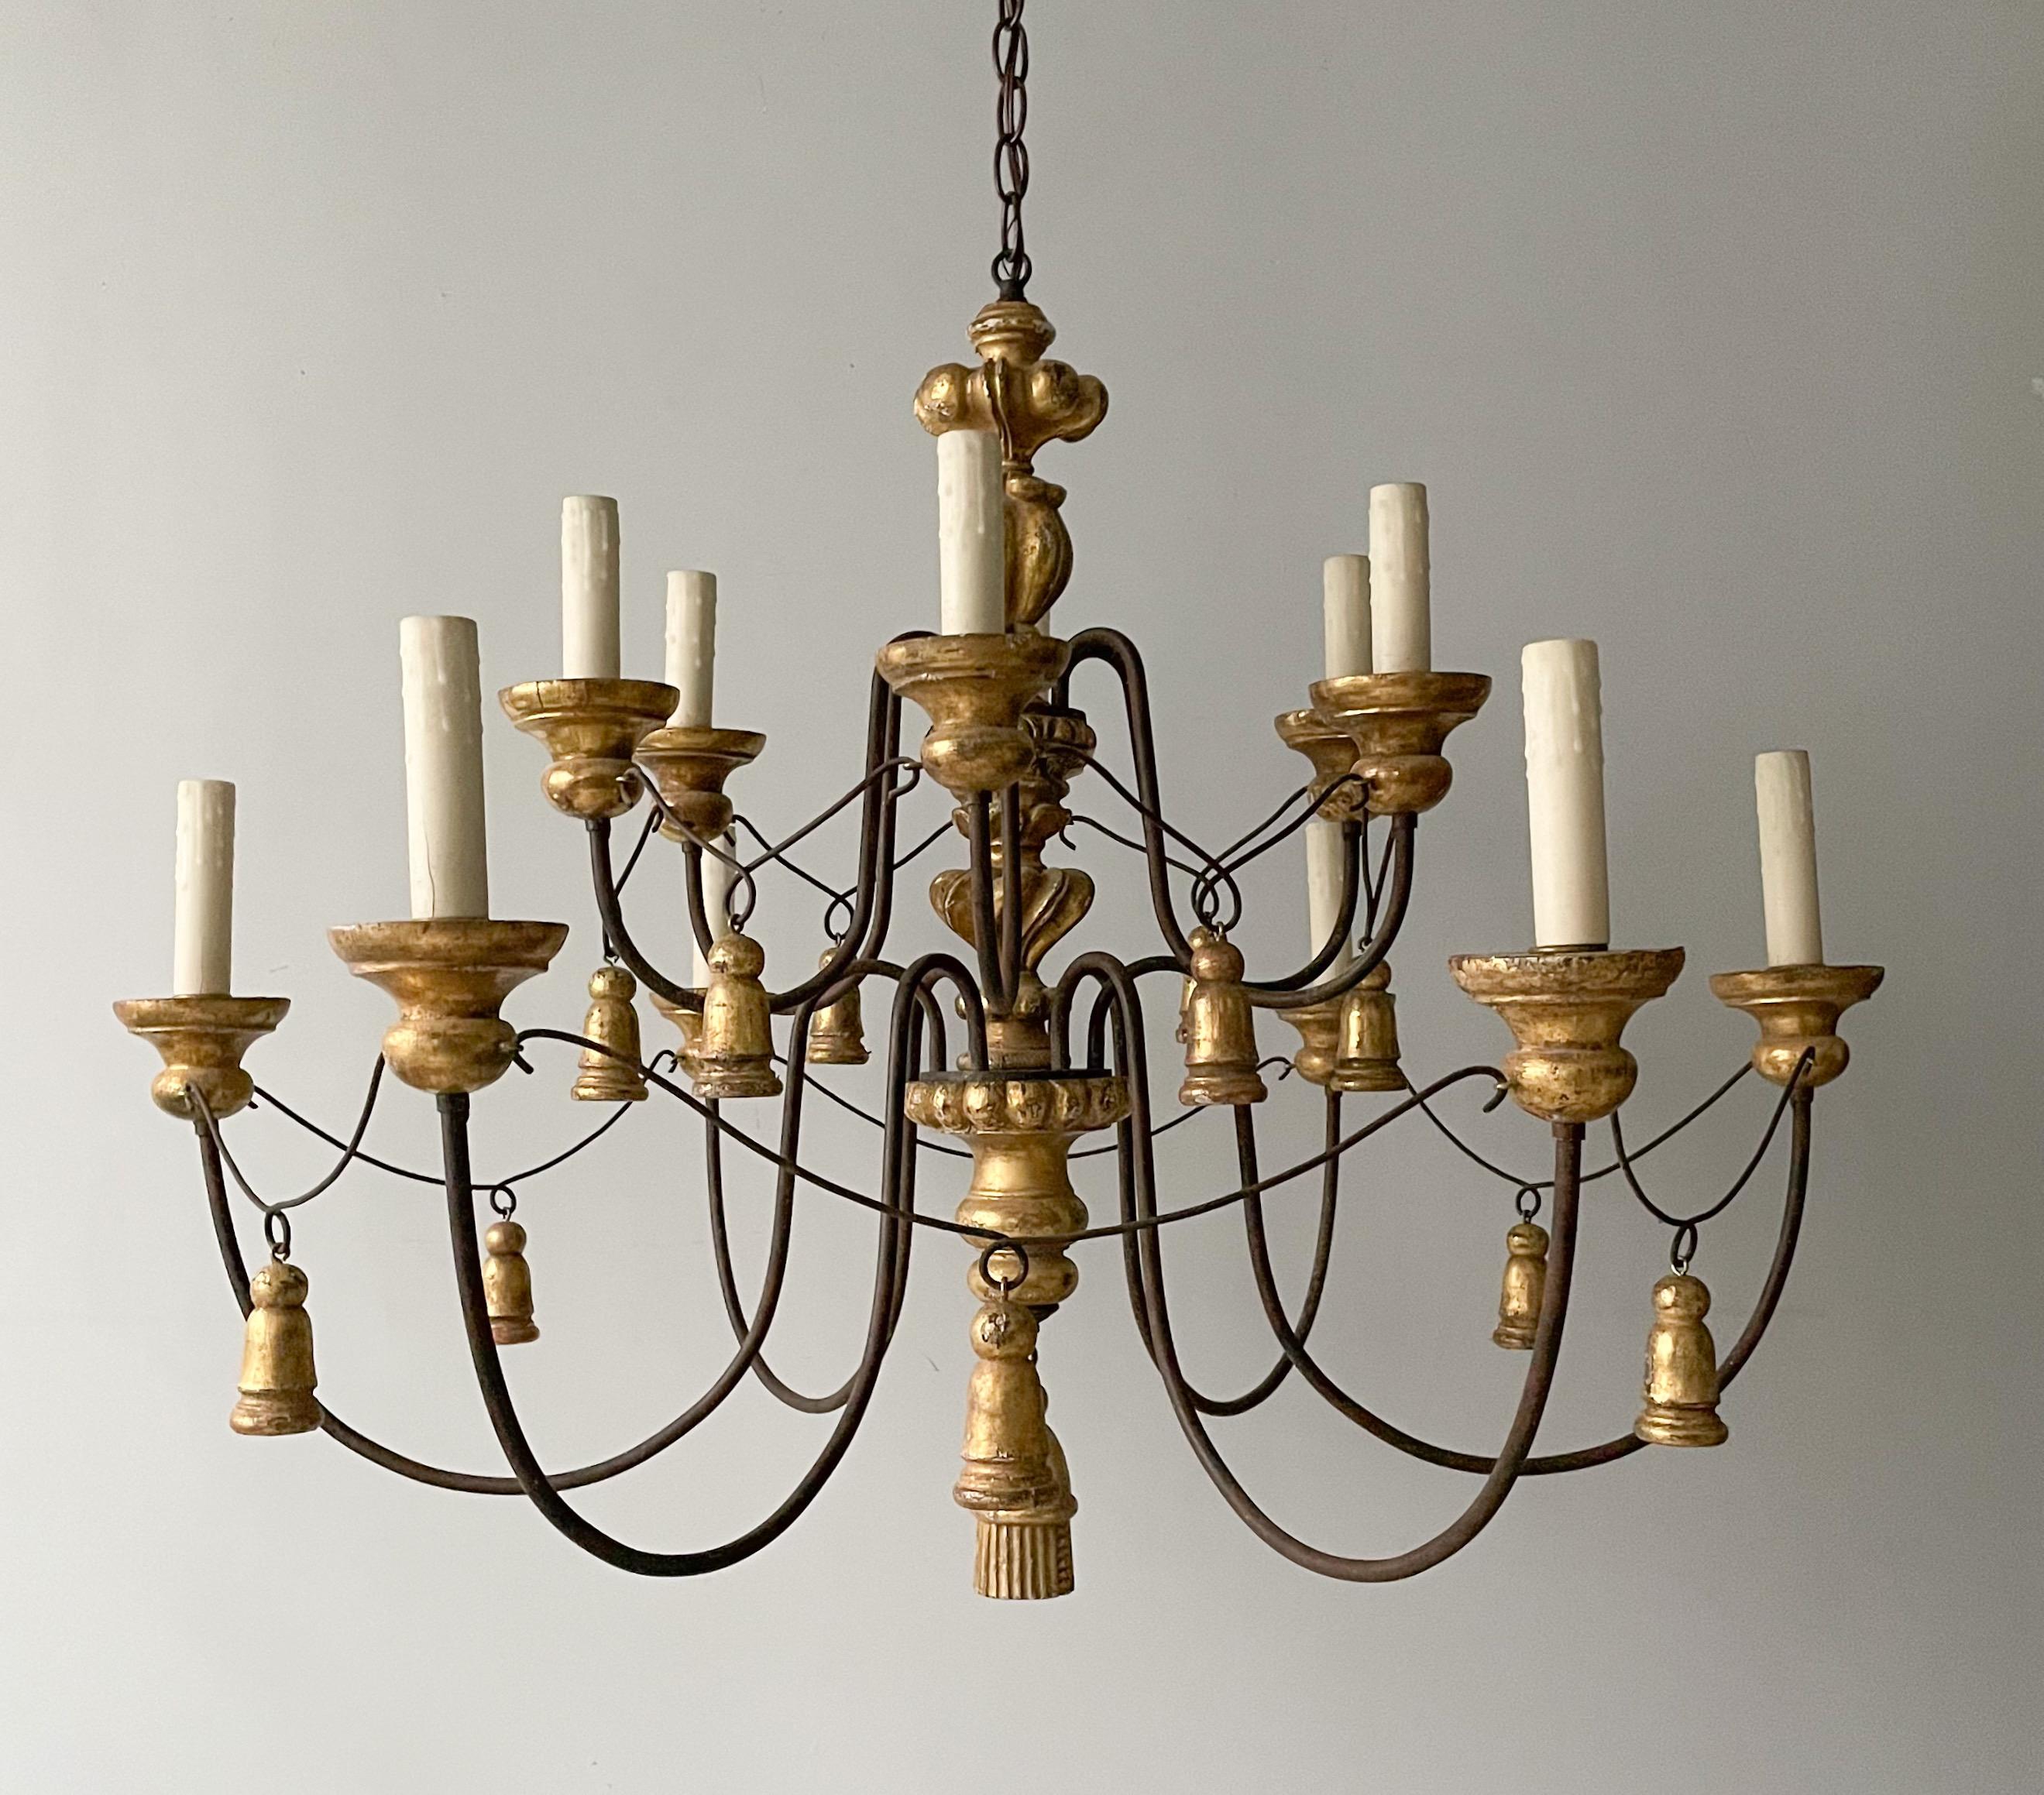 Exquisite, vintage gilt wood and iron “Tassel” chandelier by Paul Ferrante, Los Angeles.

The chandelier features a scrolled-iron, two tier frame in a dark rusty brown finish with gilt wood decorations. 

The chandelier is wired and in working